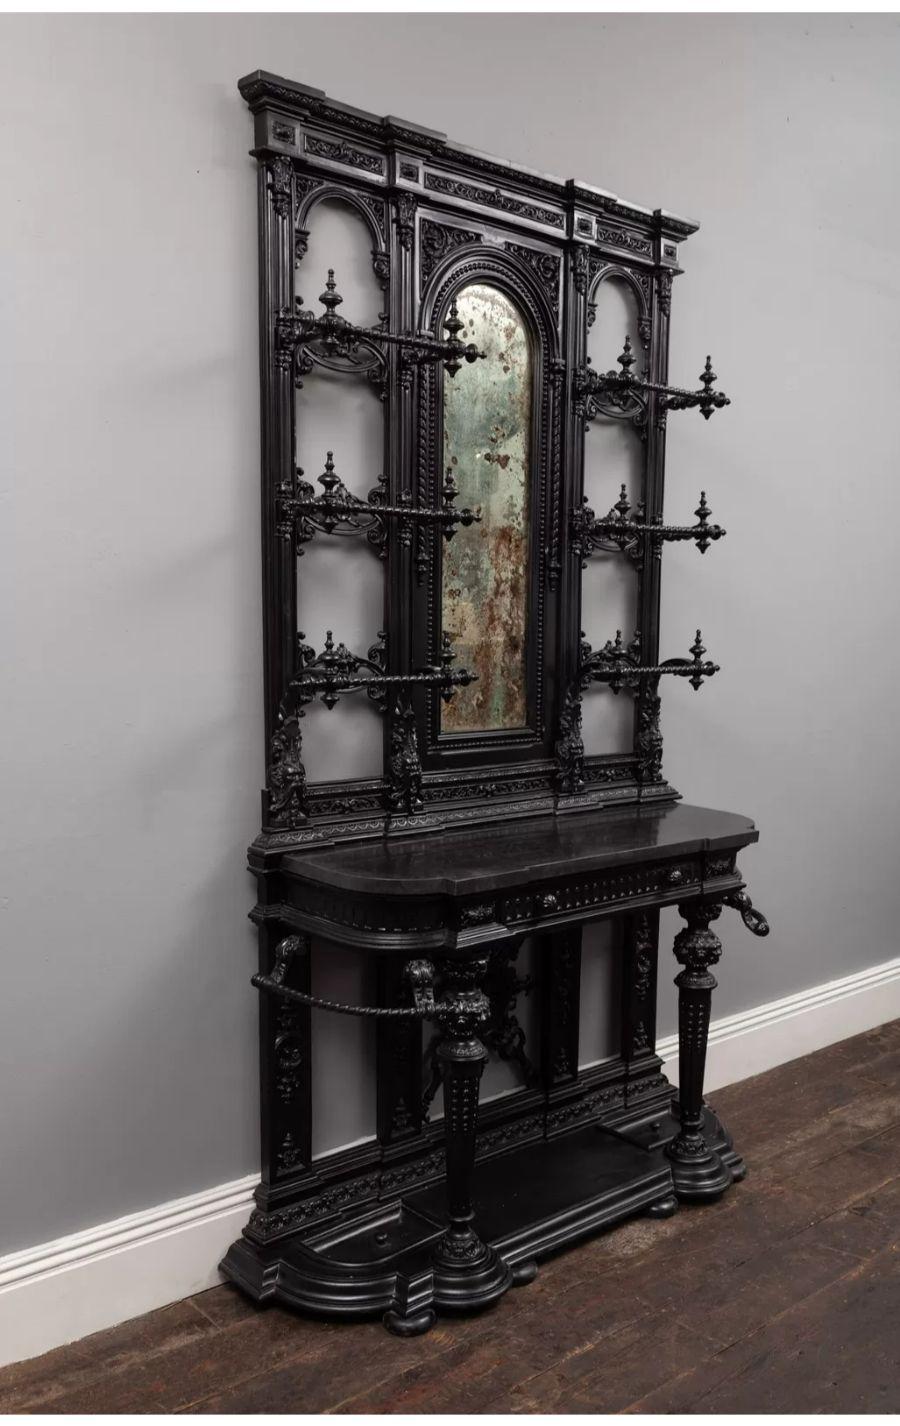 An exceptional antique Victorian cast-iron hall stand by Coalbrookdale.

With black Kilkenny marble top, coat hooks, stick stands, removable umbrella drip trays and original mirror.

Large in scale and highly decorative, having the finest quality